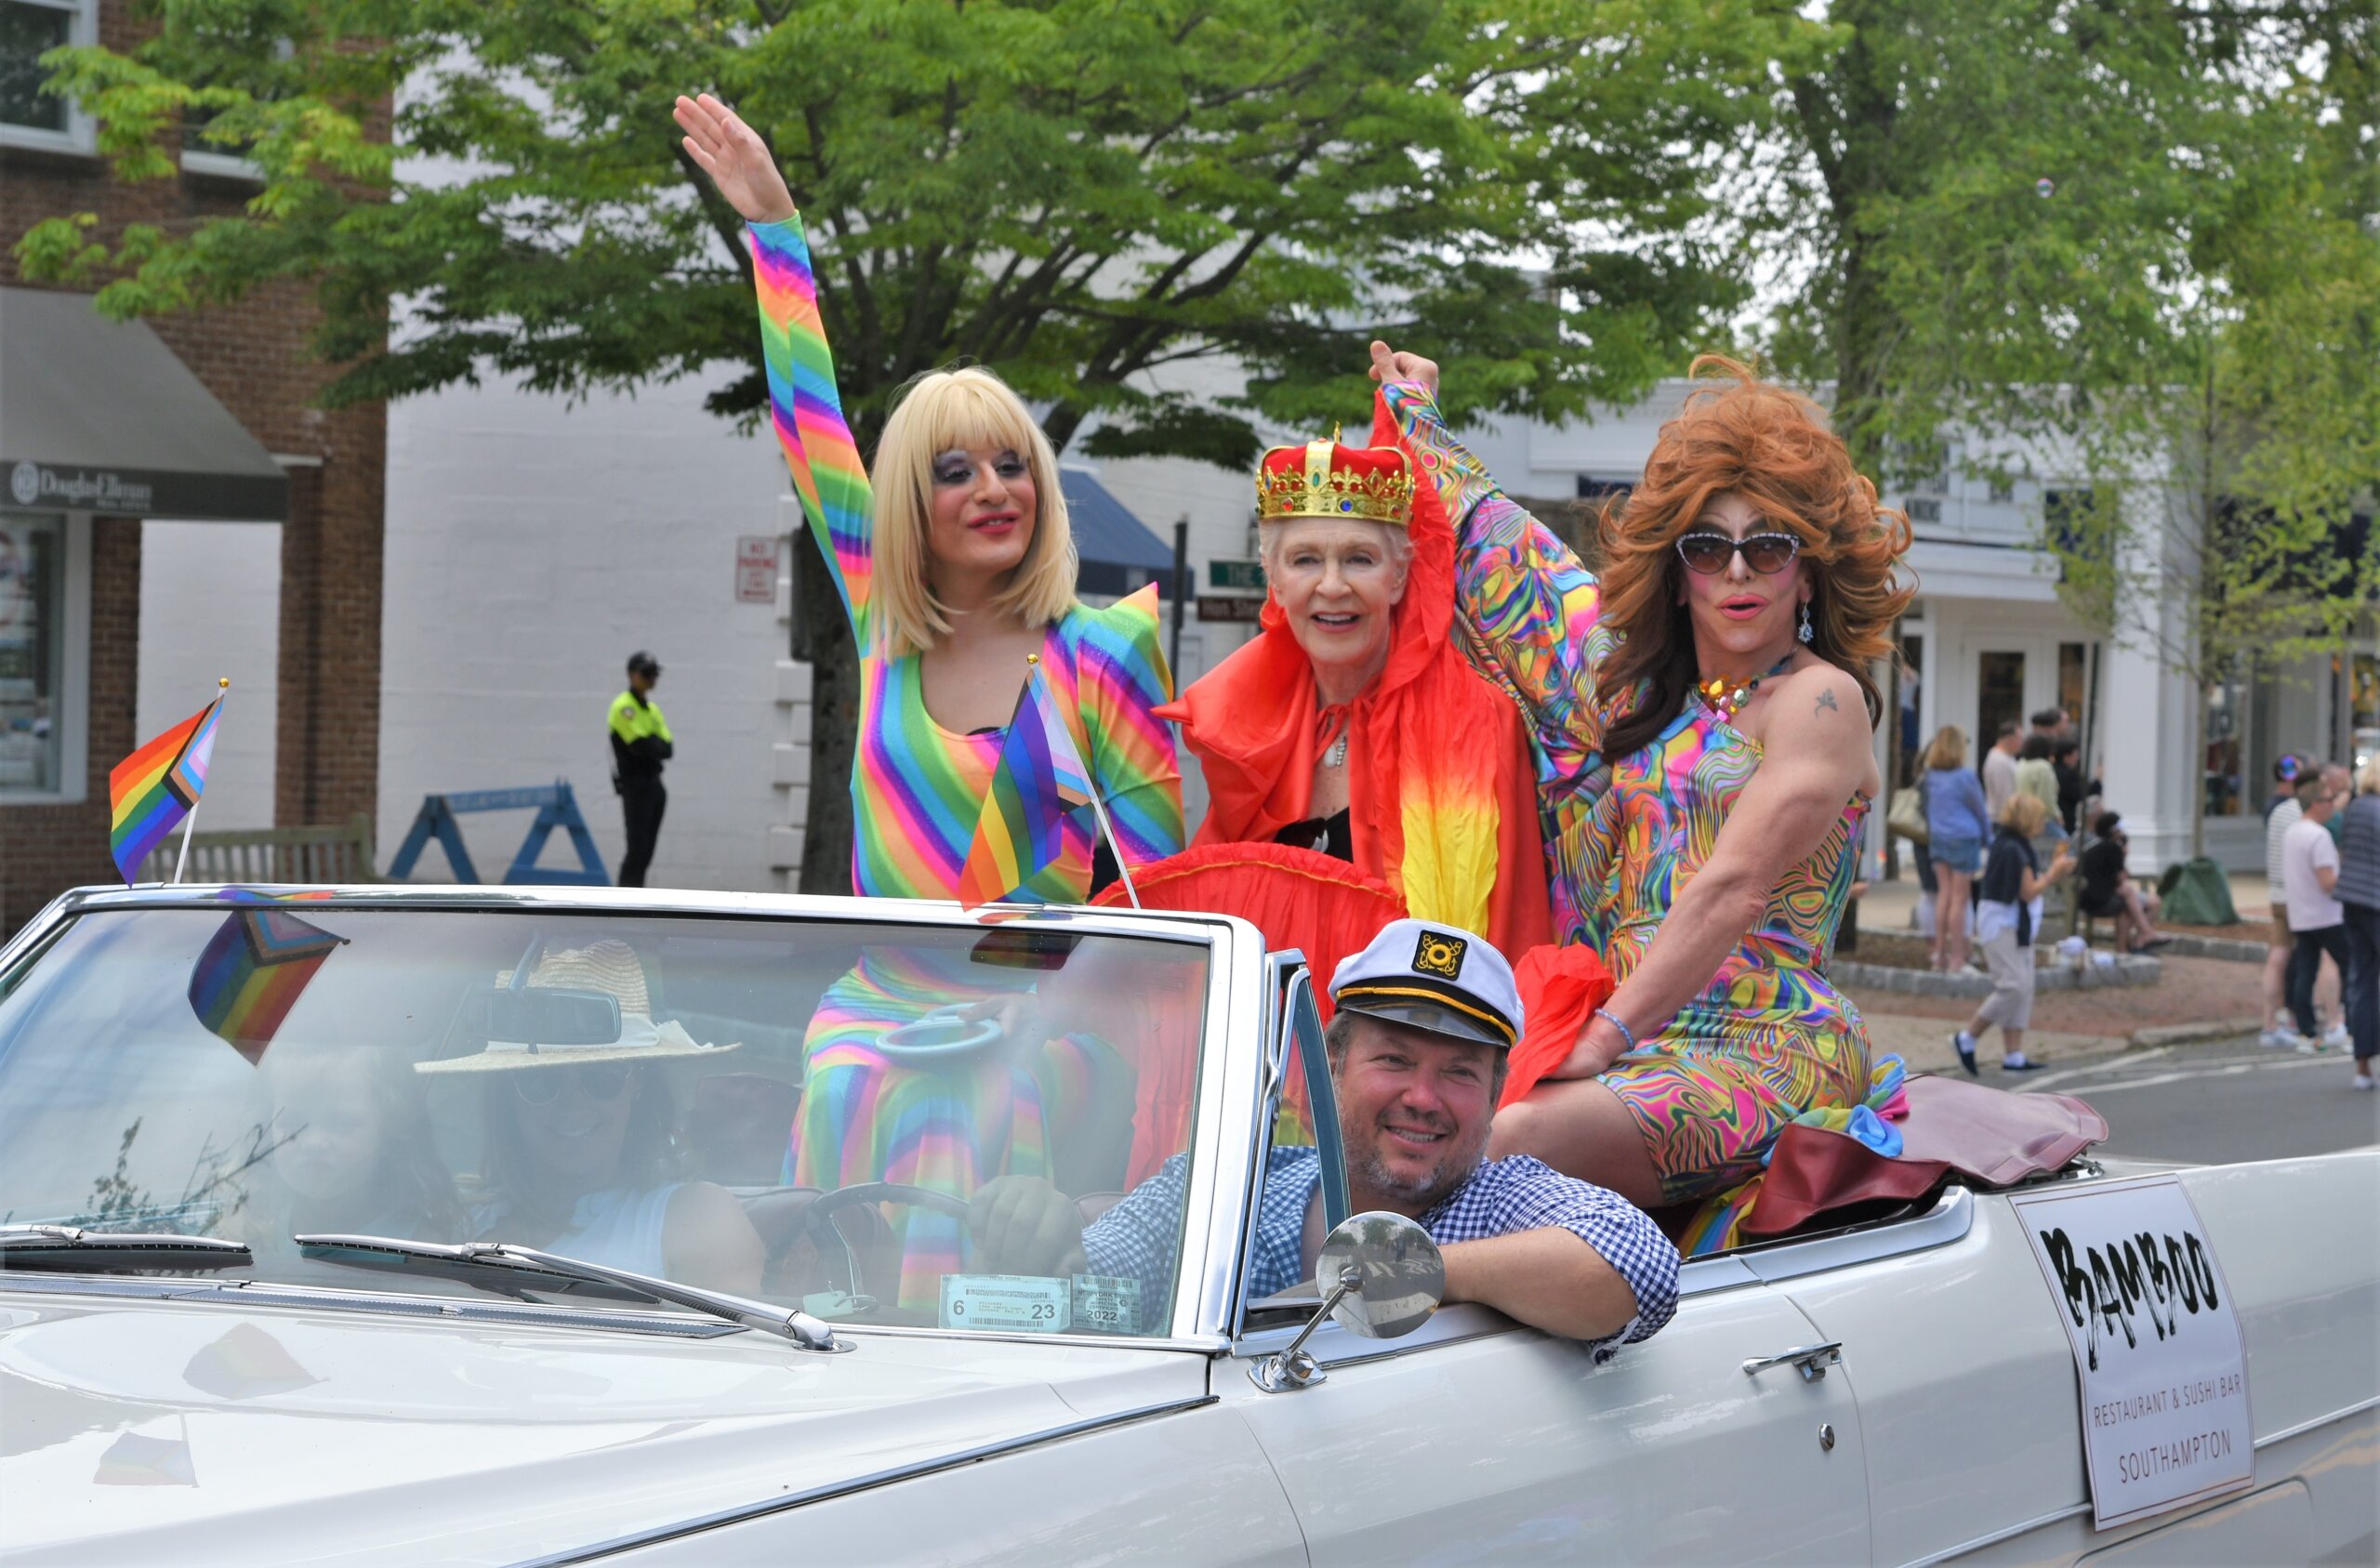 The Bamboo car in the 2022 Hamptons Pride Parade, starring divas RaffaShow and Rusty Nails